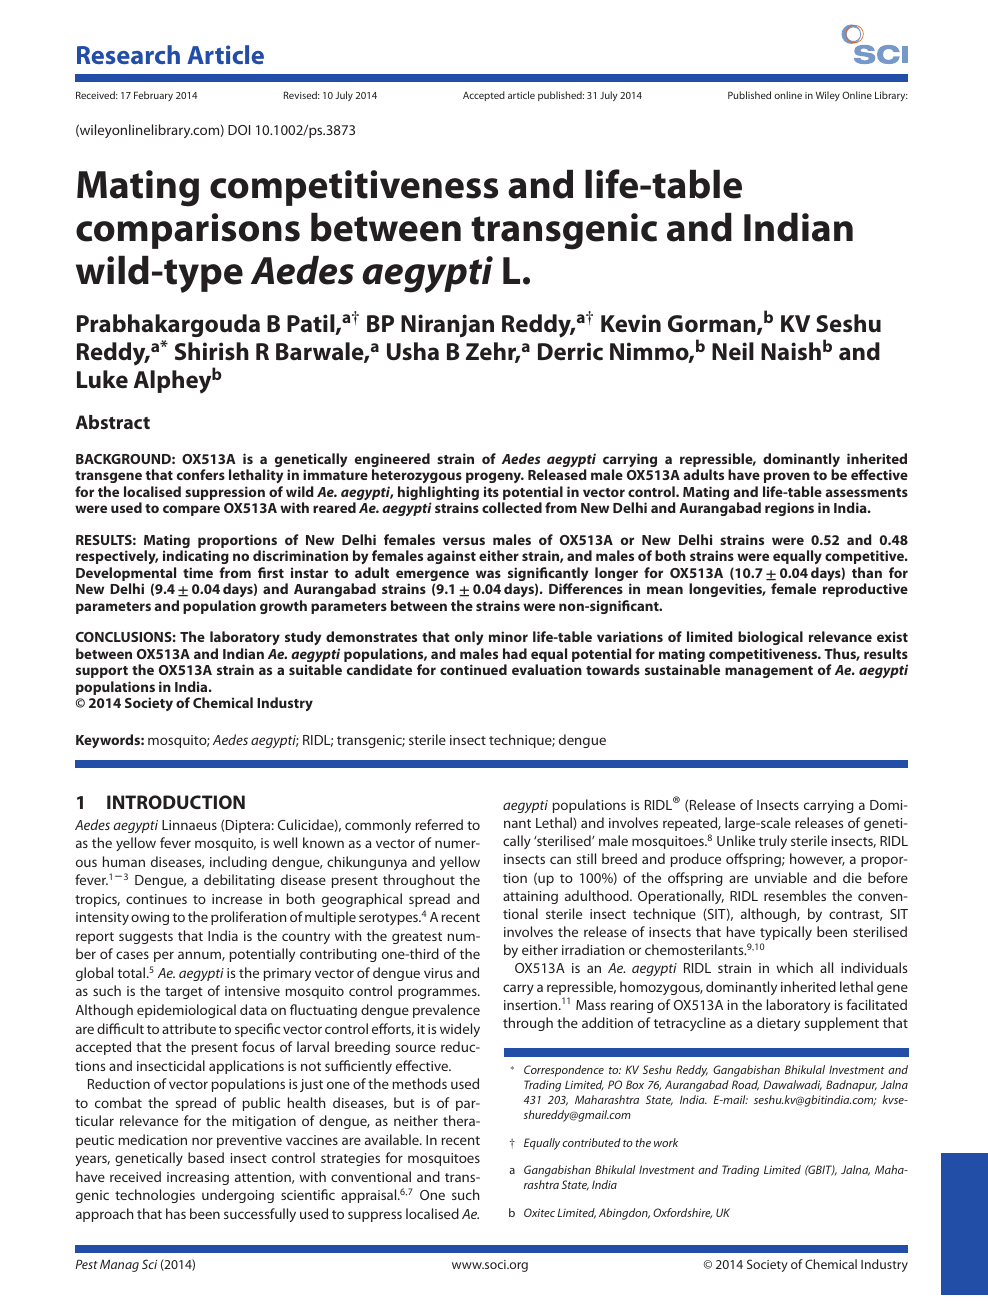 Mating Competitiveness And Life Table Comparisons Between Transgenic And Indian Wild Type Aedes Aegypti L Topic Of Research Paper In Biological Sciences Download Scholarly Article Pdf And Read For Free On Cyberleninka Open